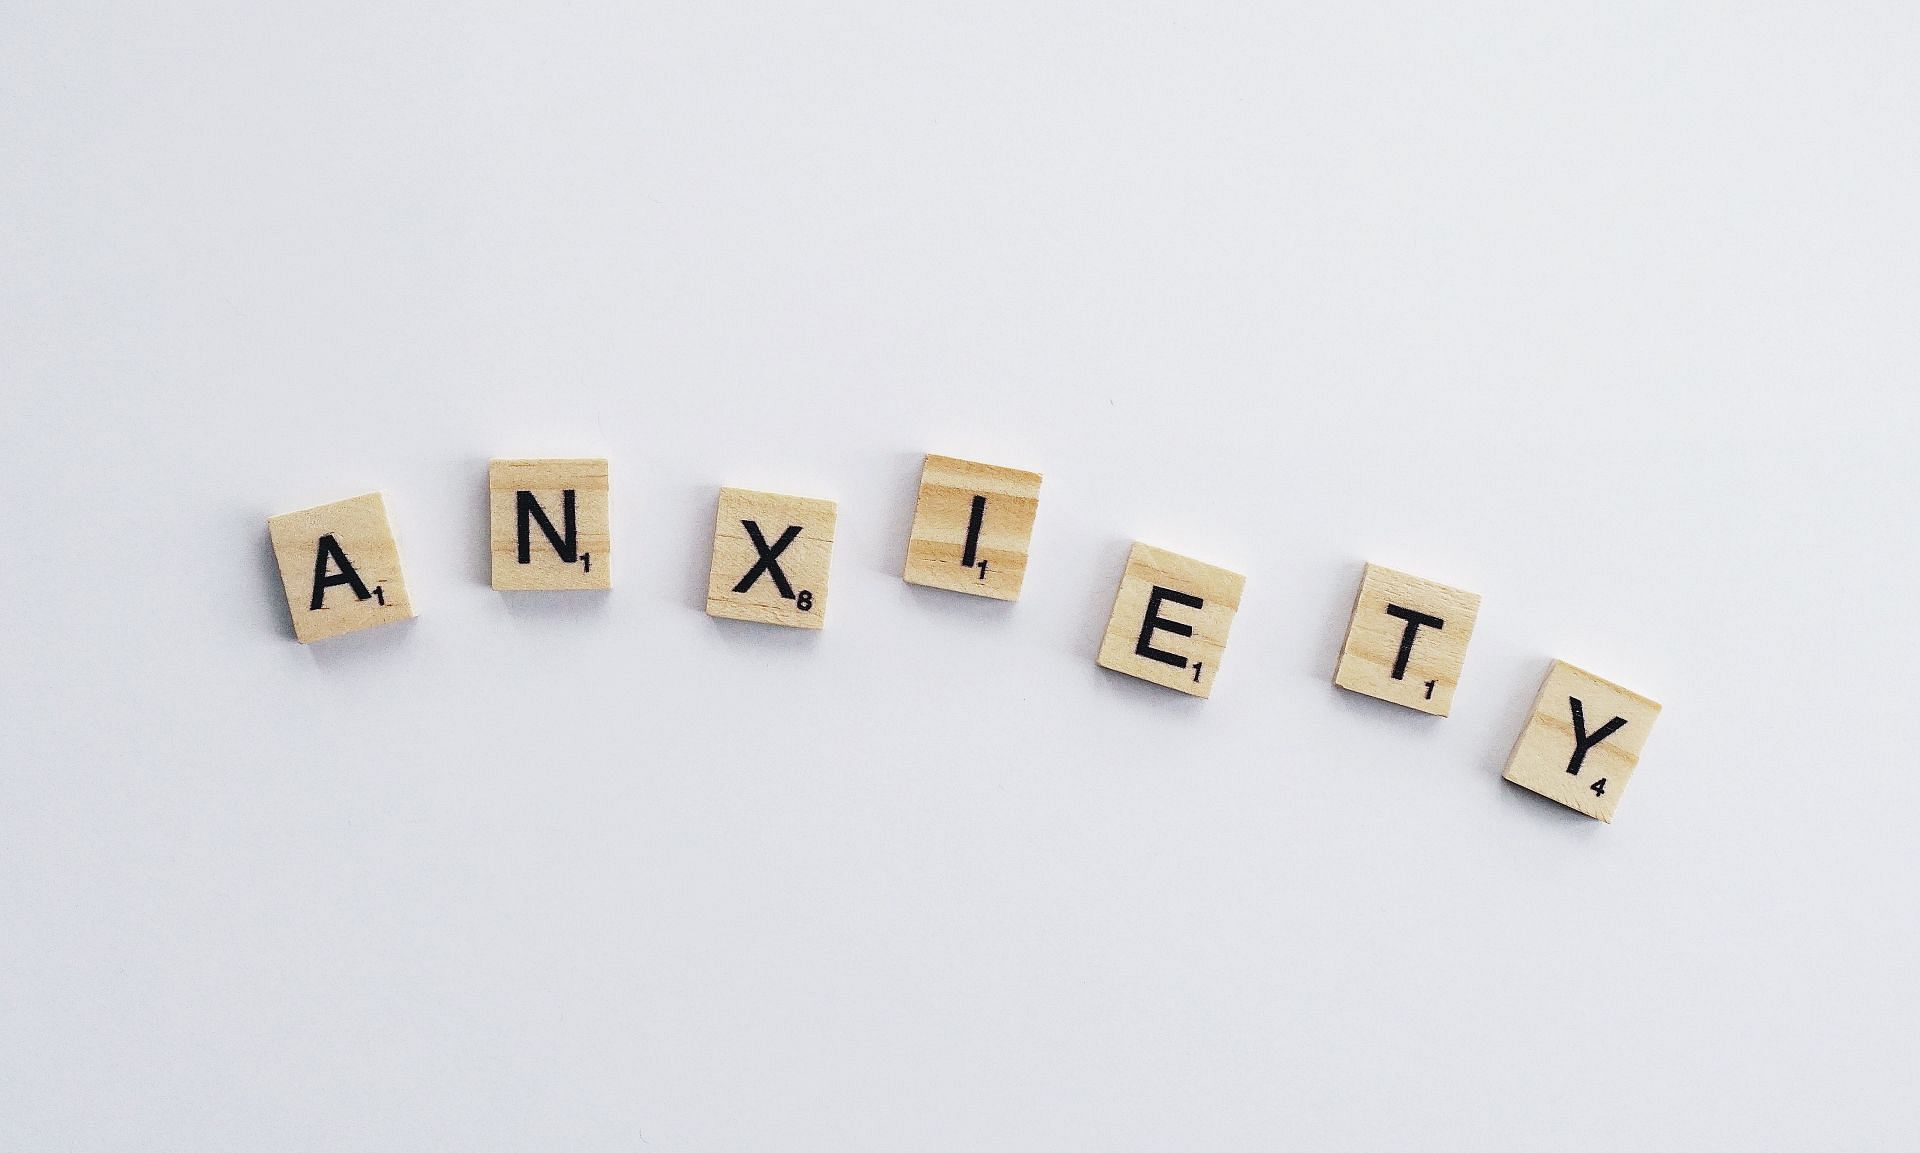 Adjustment disorder with anxiety is a condition that can occur when a person experiences a significant life change or stressor (Photo by Suzy Hazelwood/pexels)